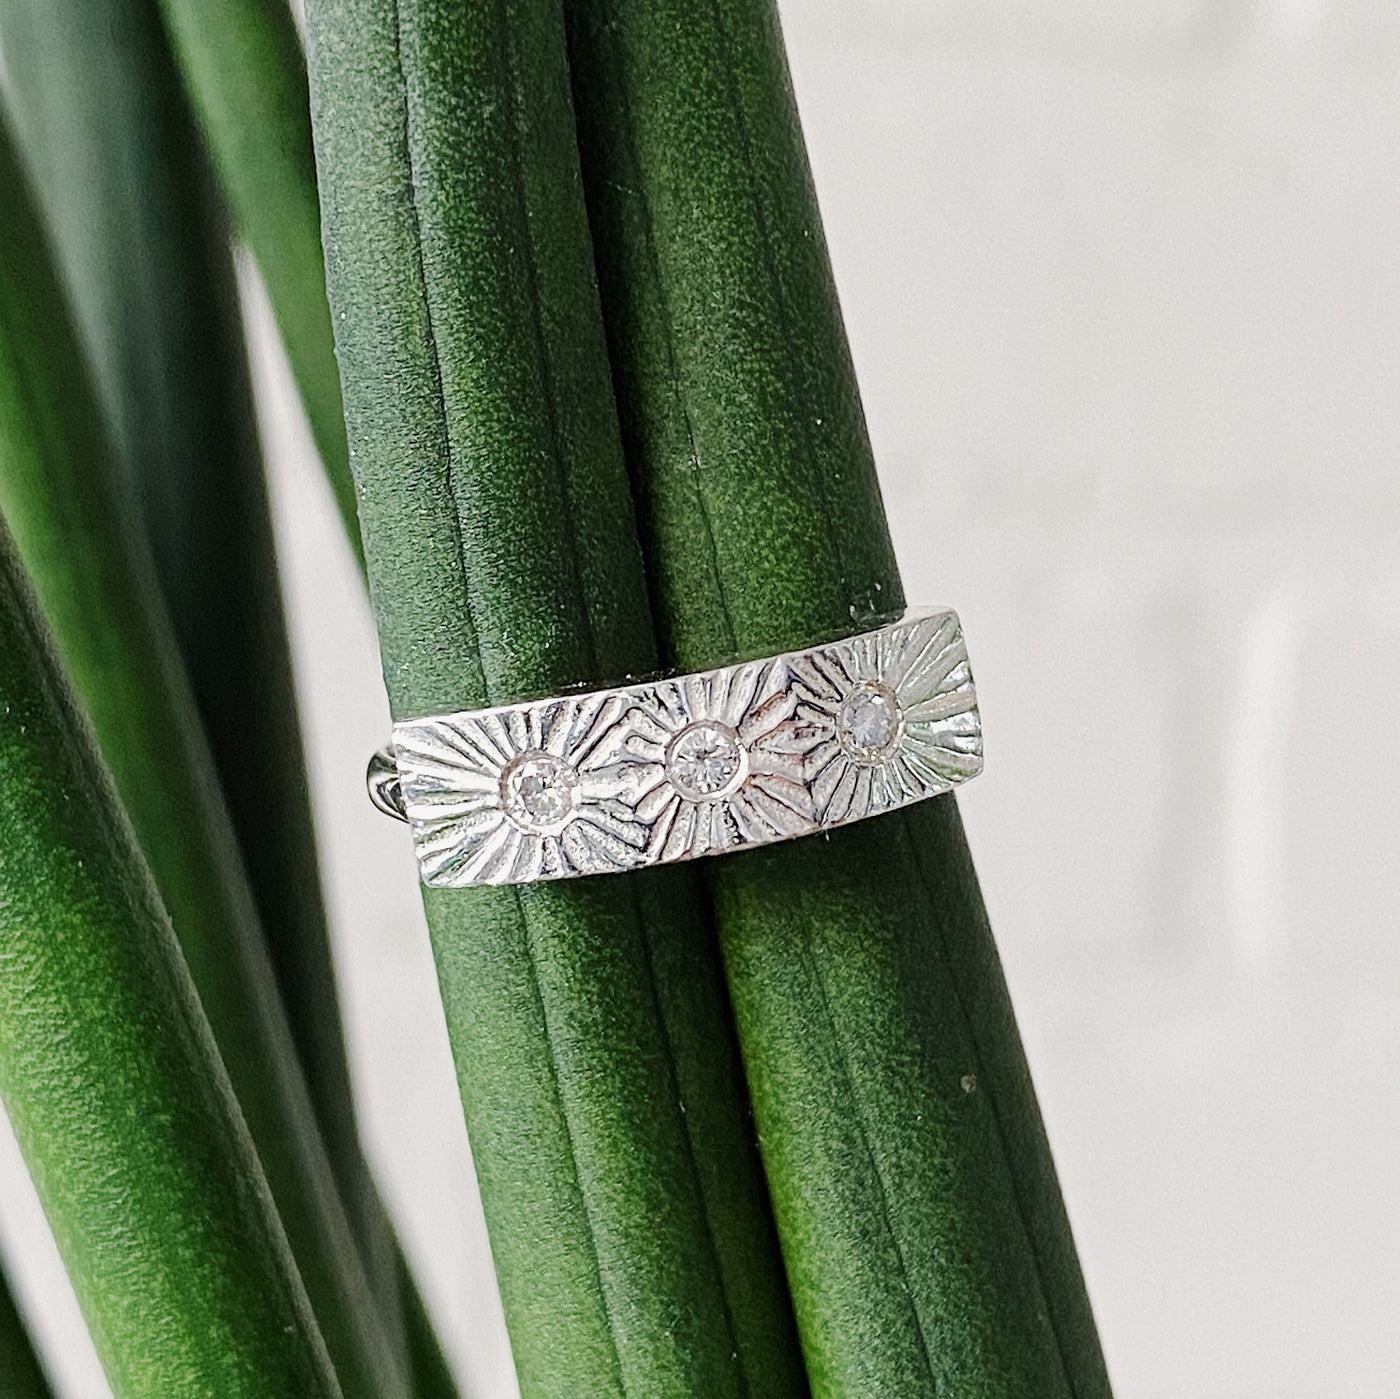 Sterling silver bar ring with three diamonds and a carved sunburst design around each by Corey Egan in natural light